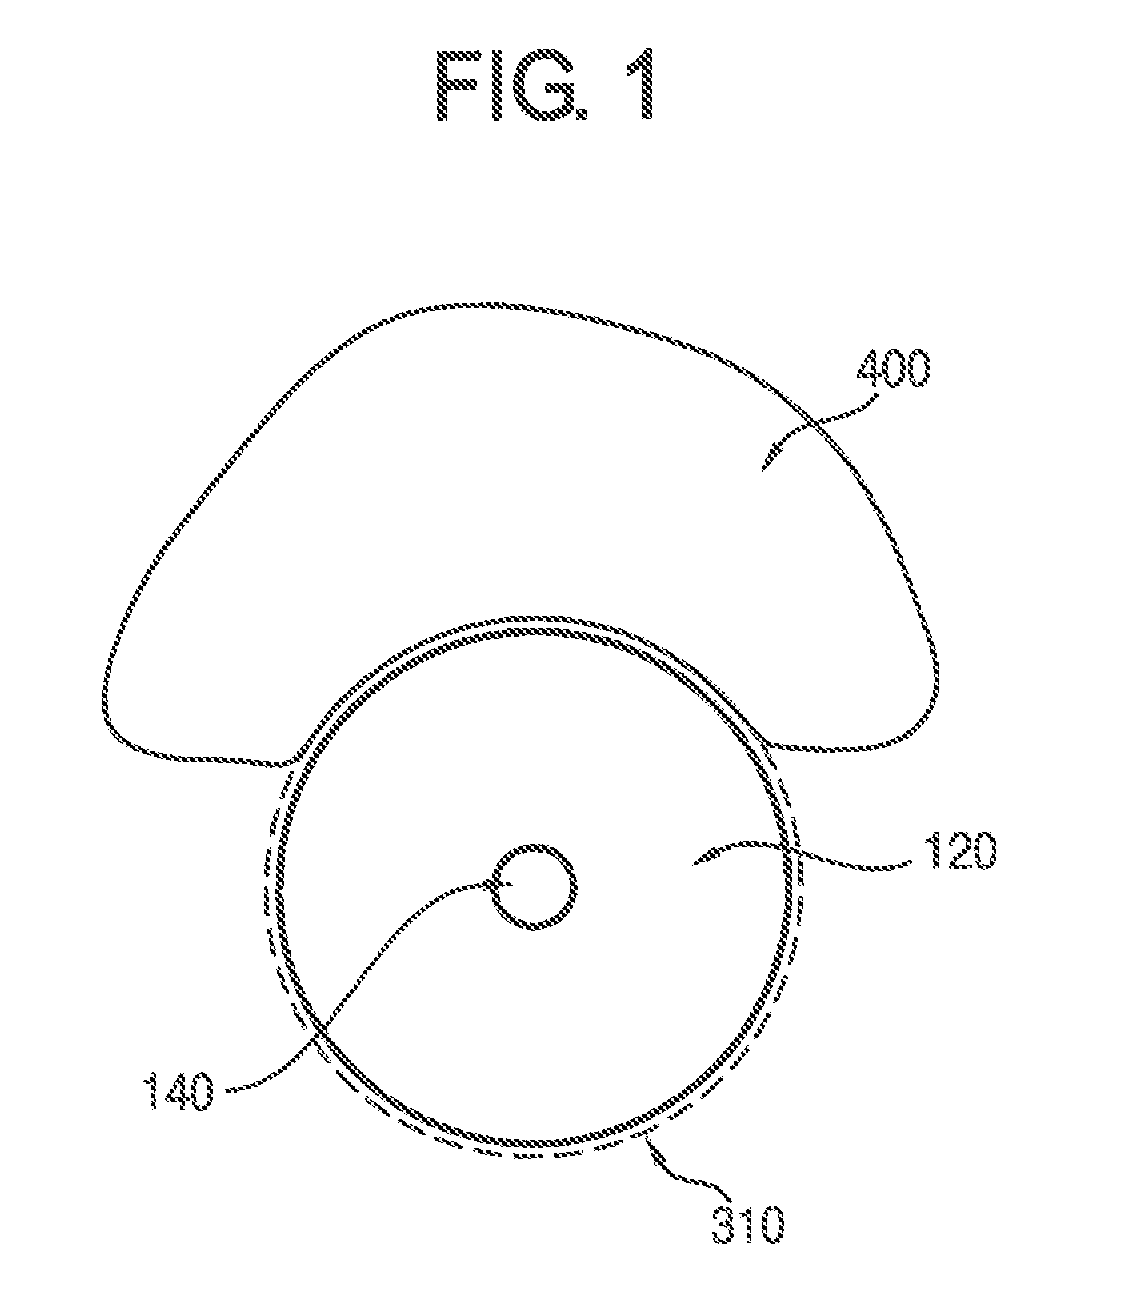 Triple endorectal ballooning system for prostate cancer radiotherapy